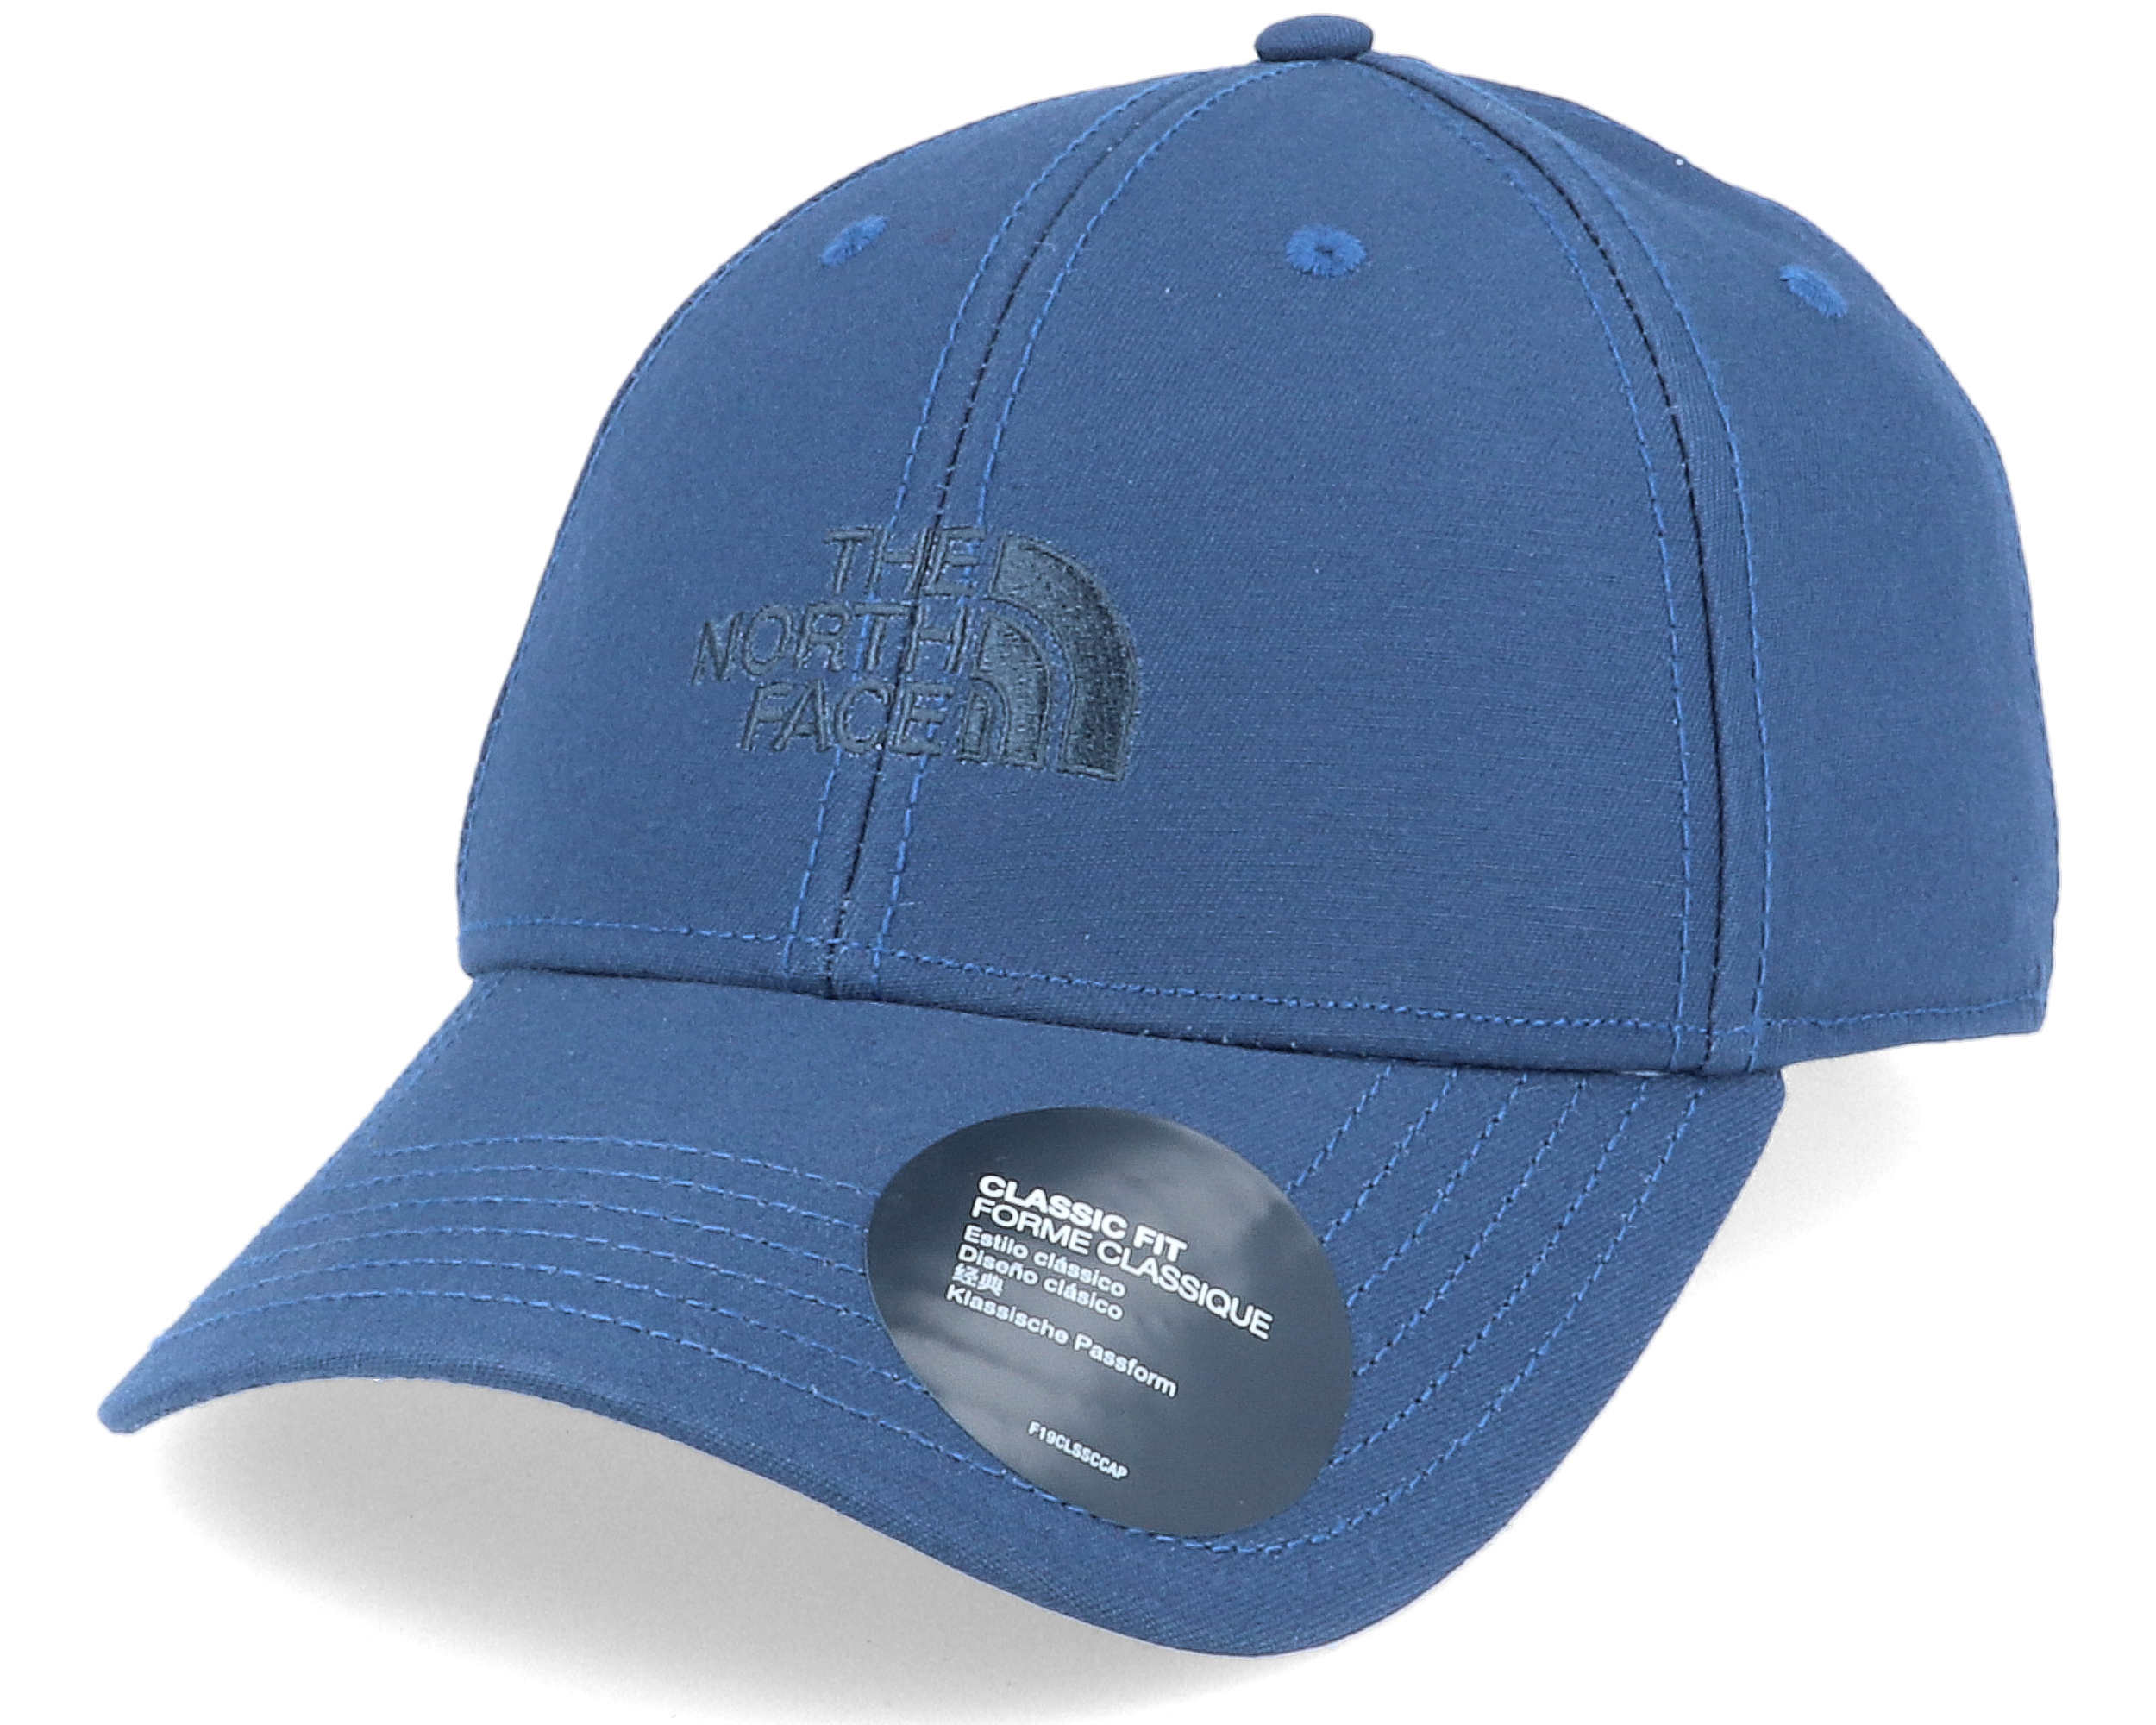 66 Classic Hat Blue Wing Teal Adjustable - The North Face caps ...